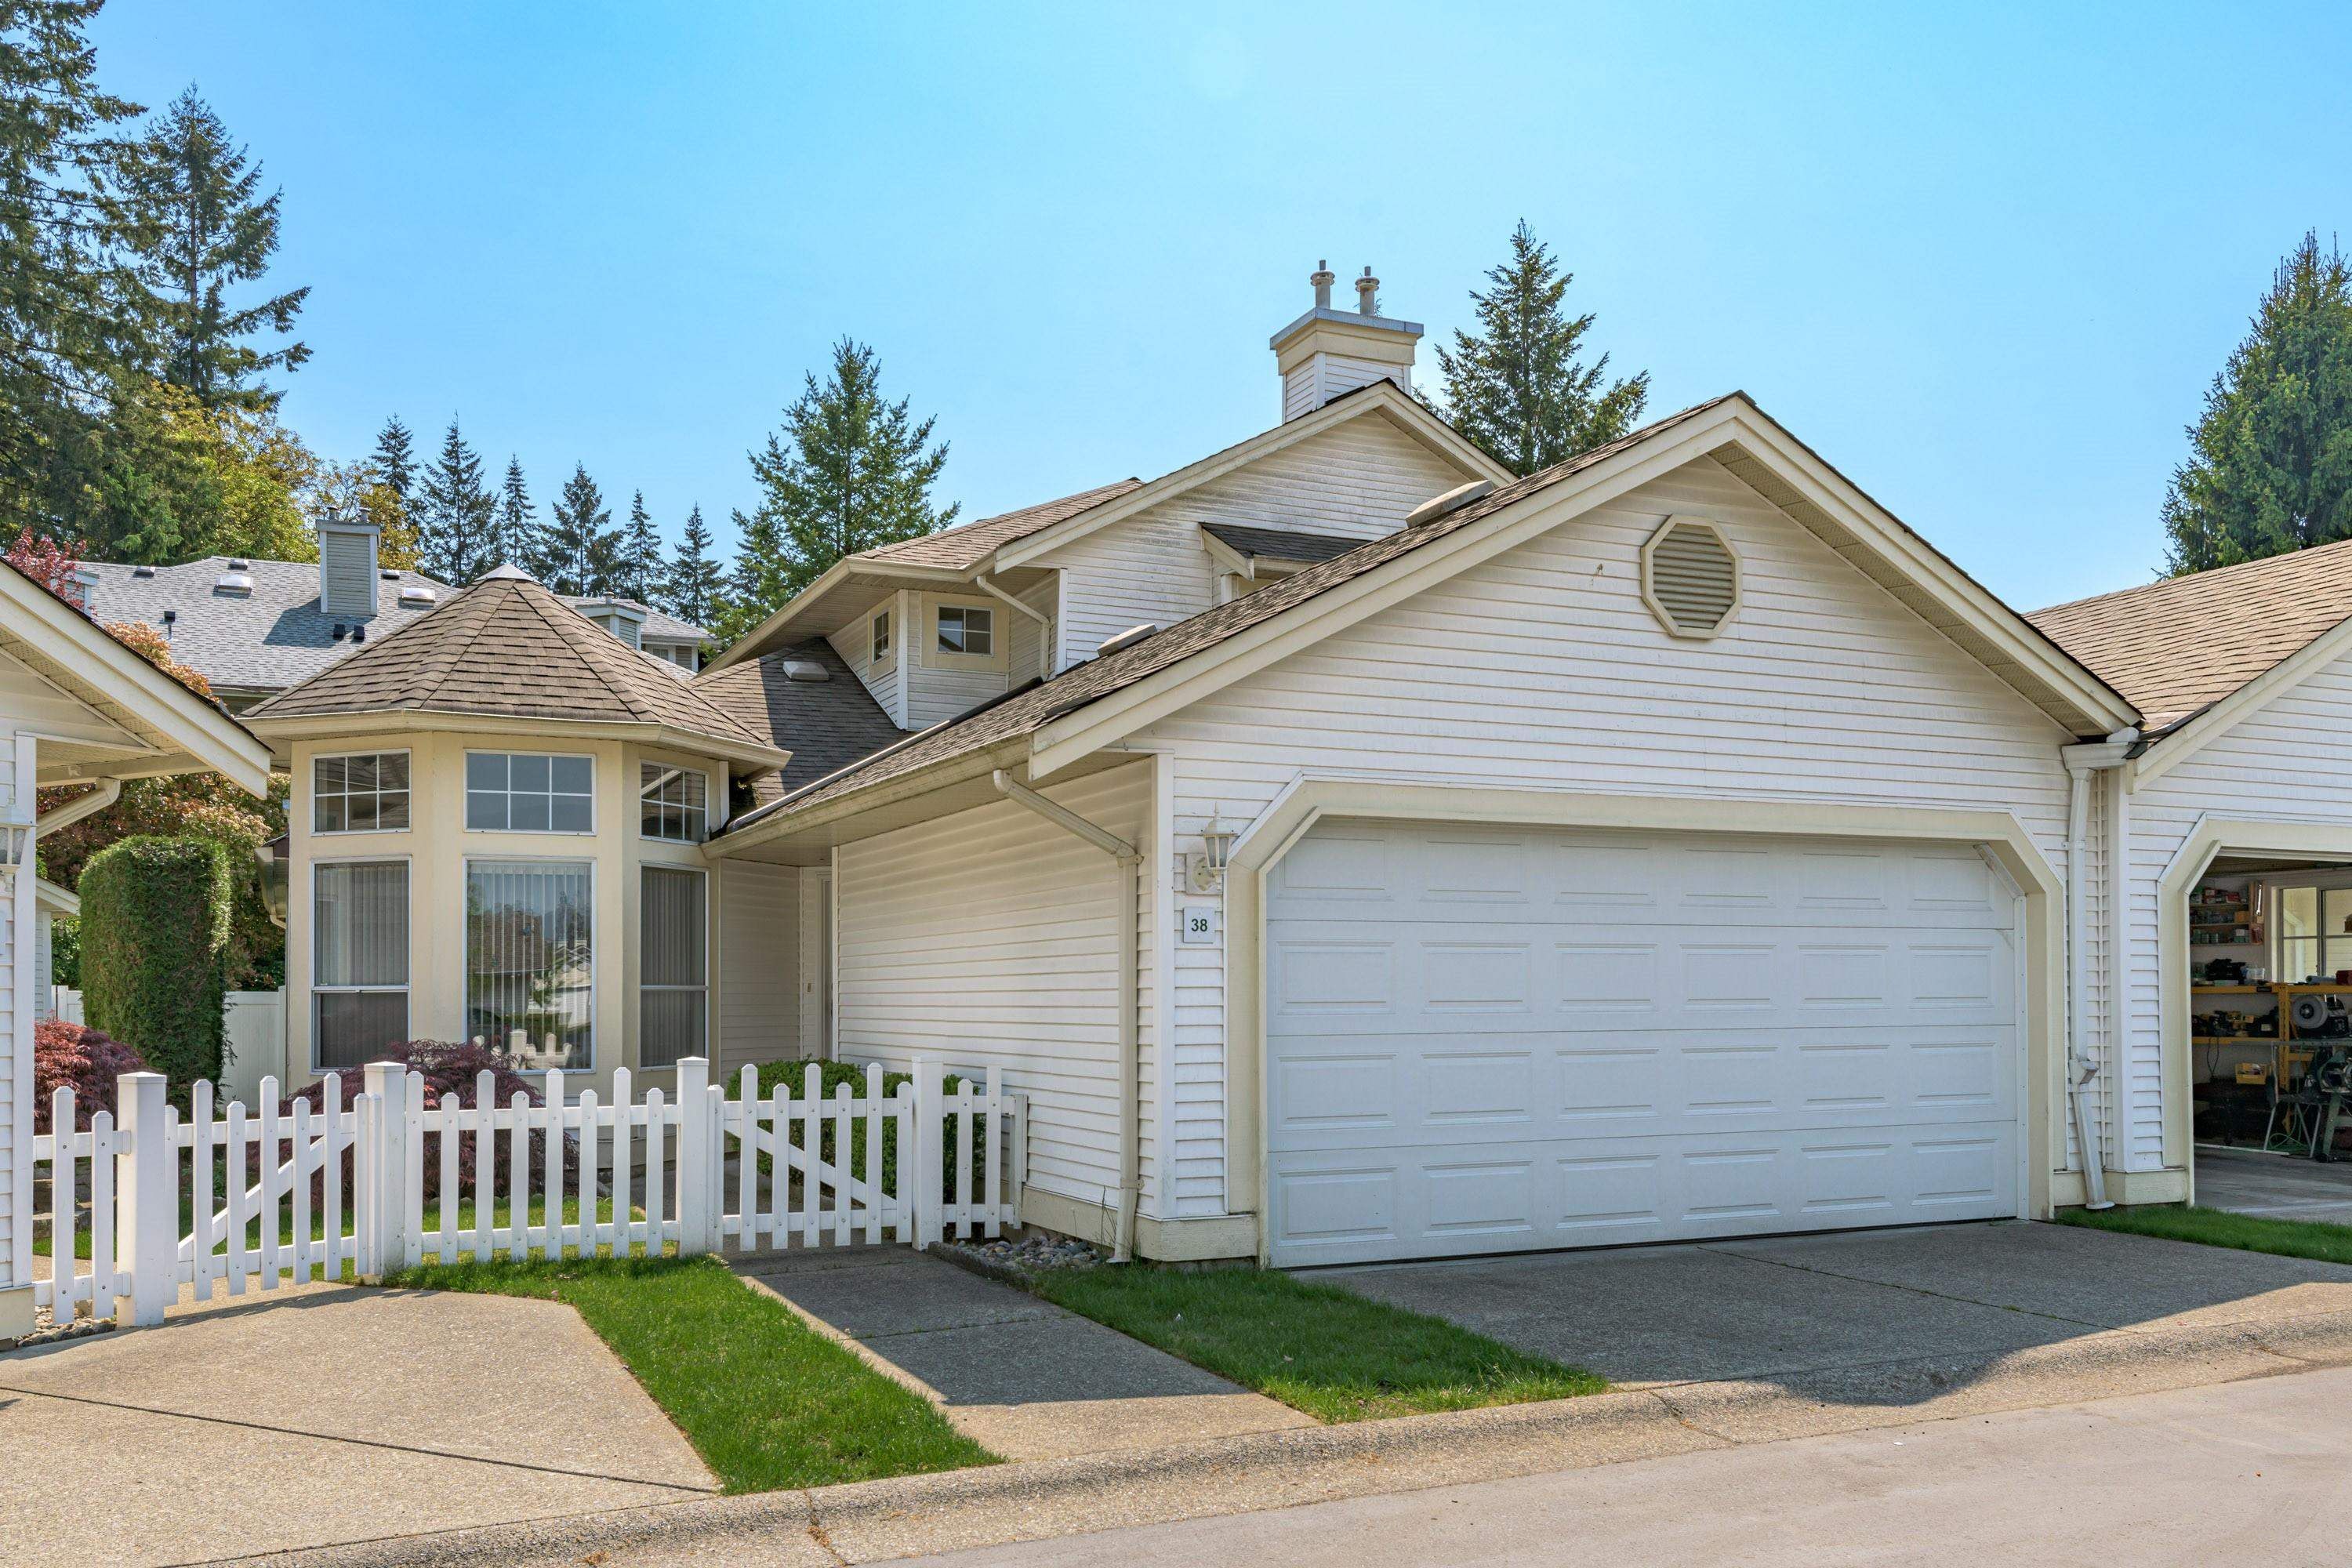 We have sold a property at 38 9208 208 ST in Langley